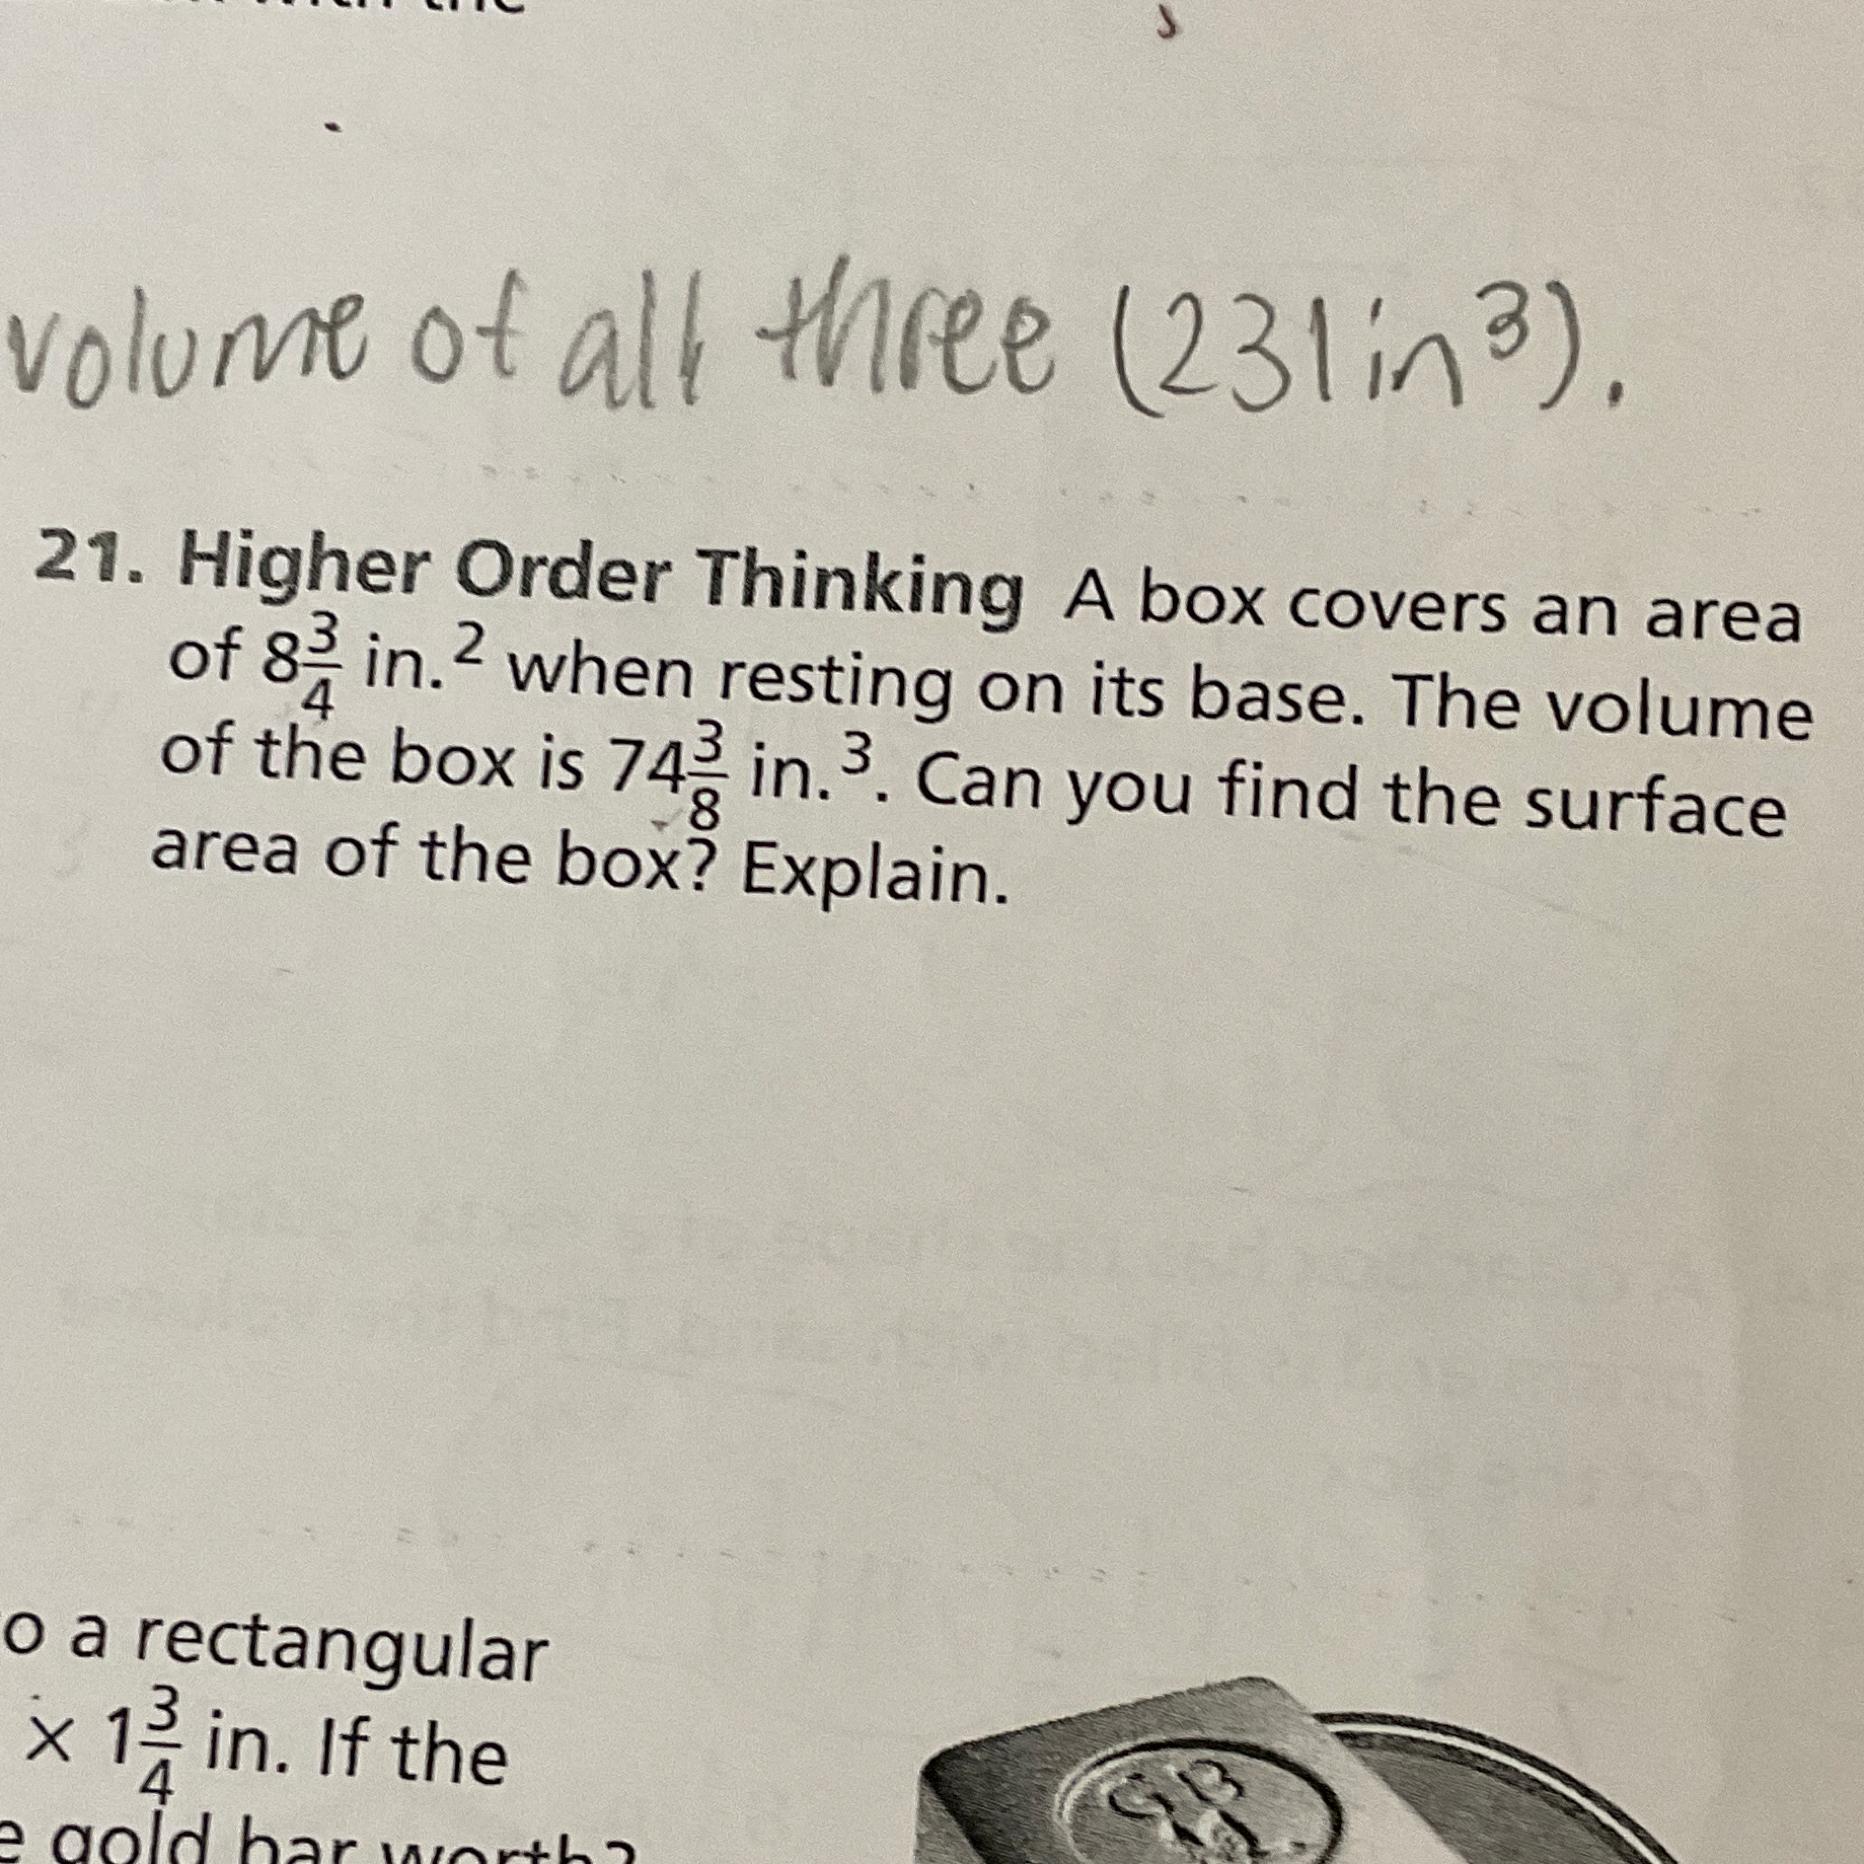 Question 21: A Box Covers An Area Of 8 3/4 In. Squared When Resting On Its Base. The Volume Of The Box